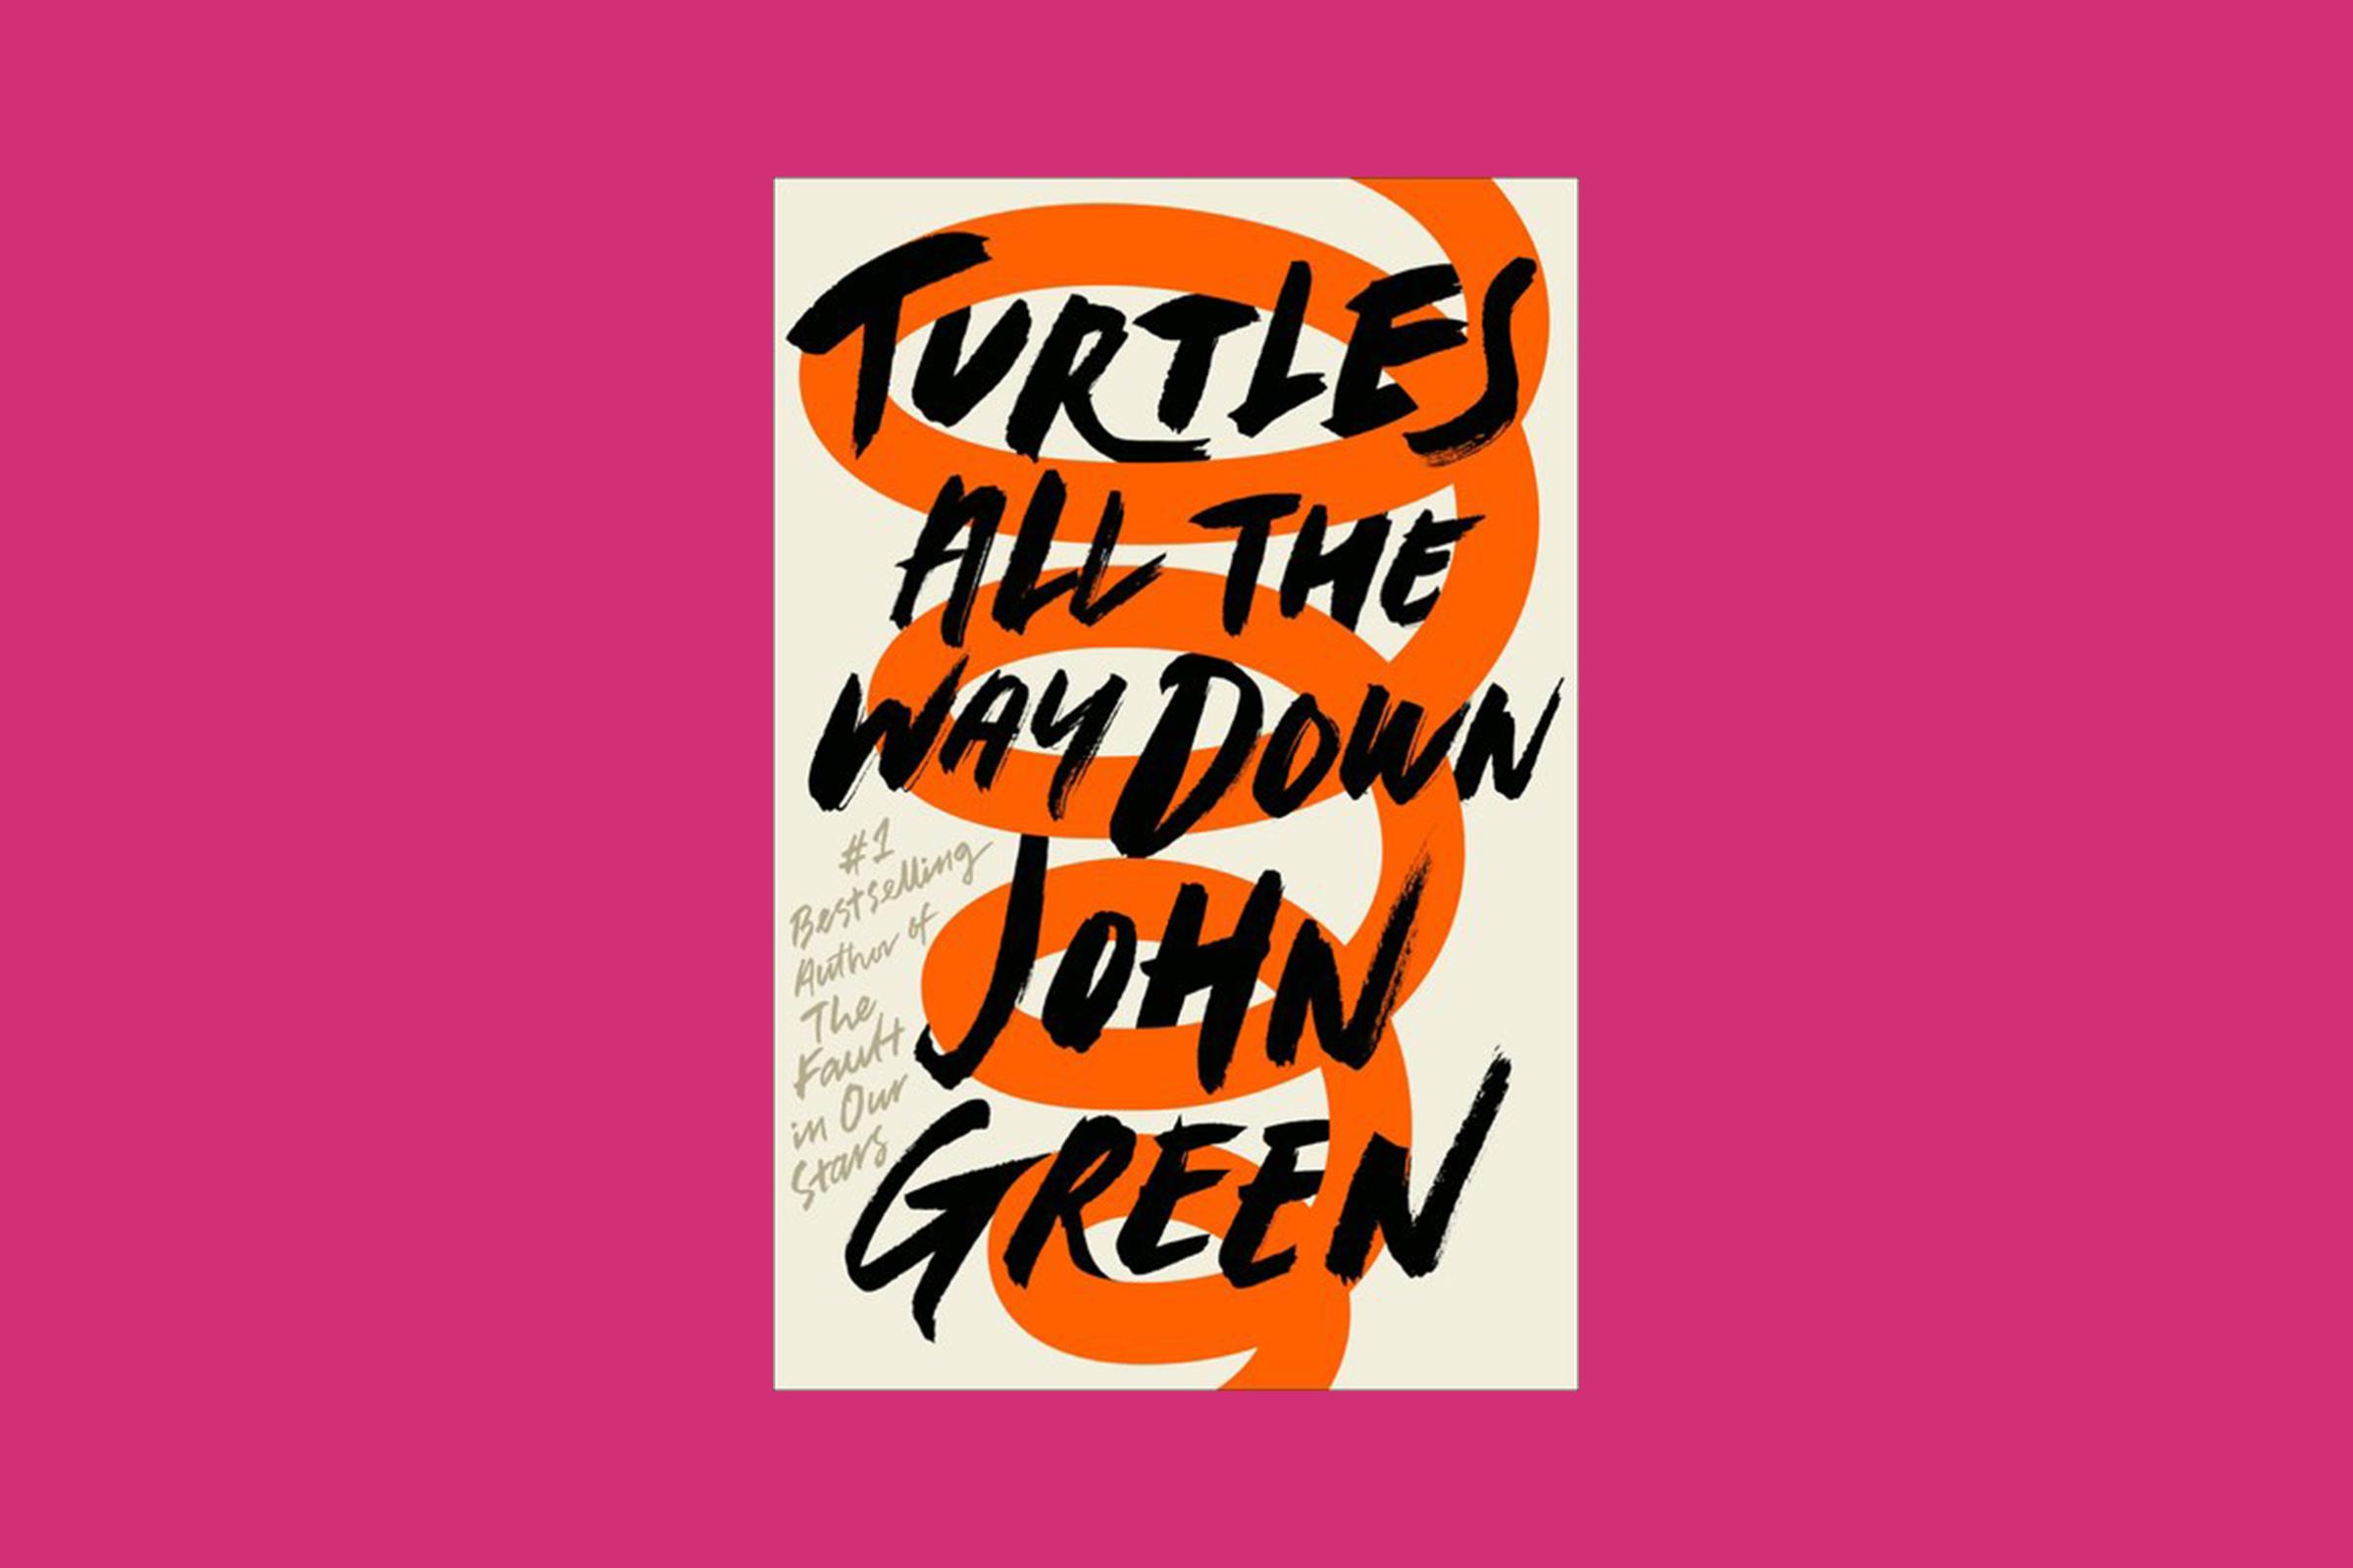 Turtles All the Way Down is one of the top 10 young adult books of 2017